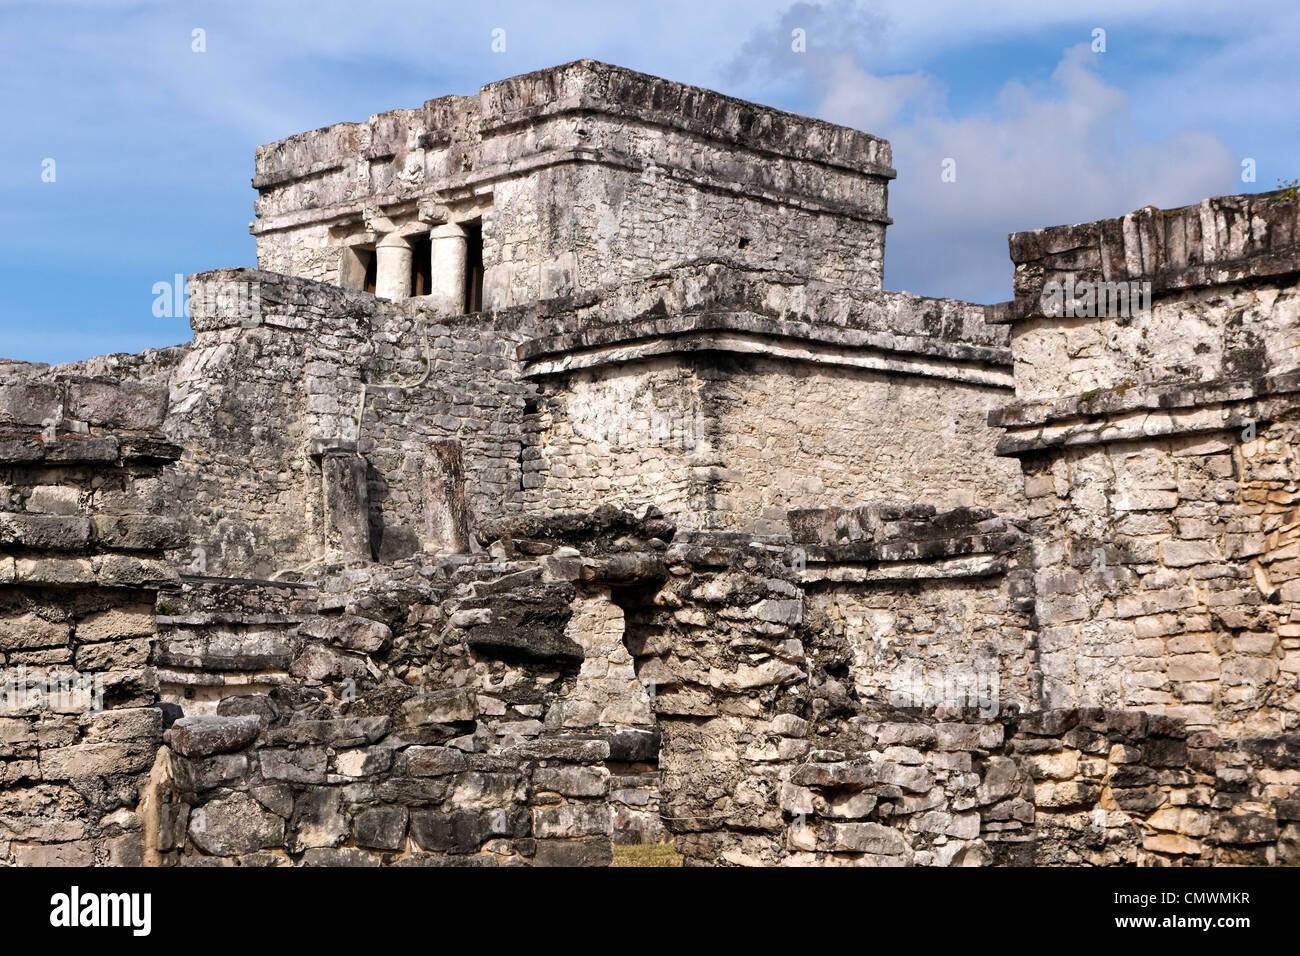 A warren of walls and ruined buildings forms a small complex of Mayan origin at Tulum, Quintana Roo, Mexico. Stock Photo